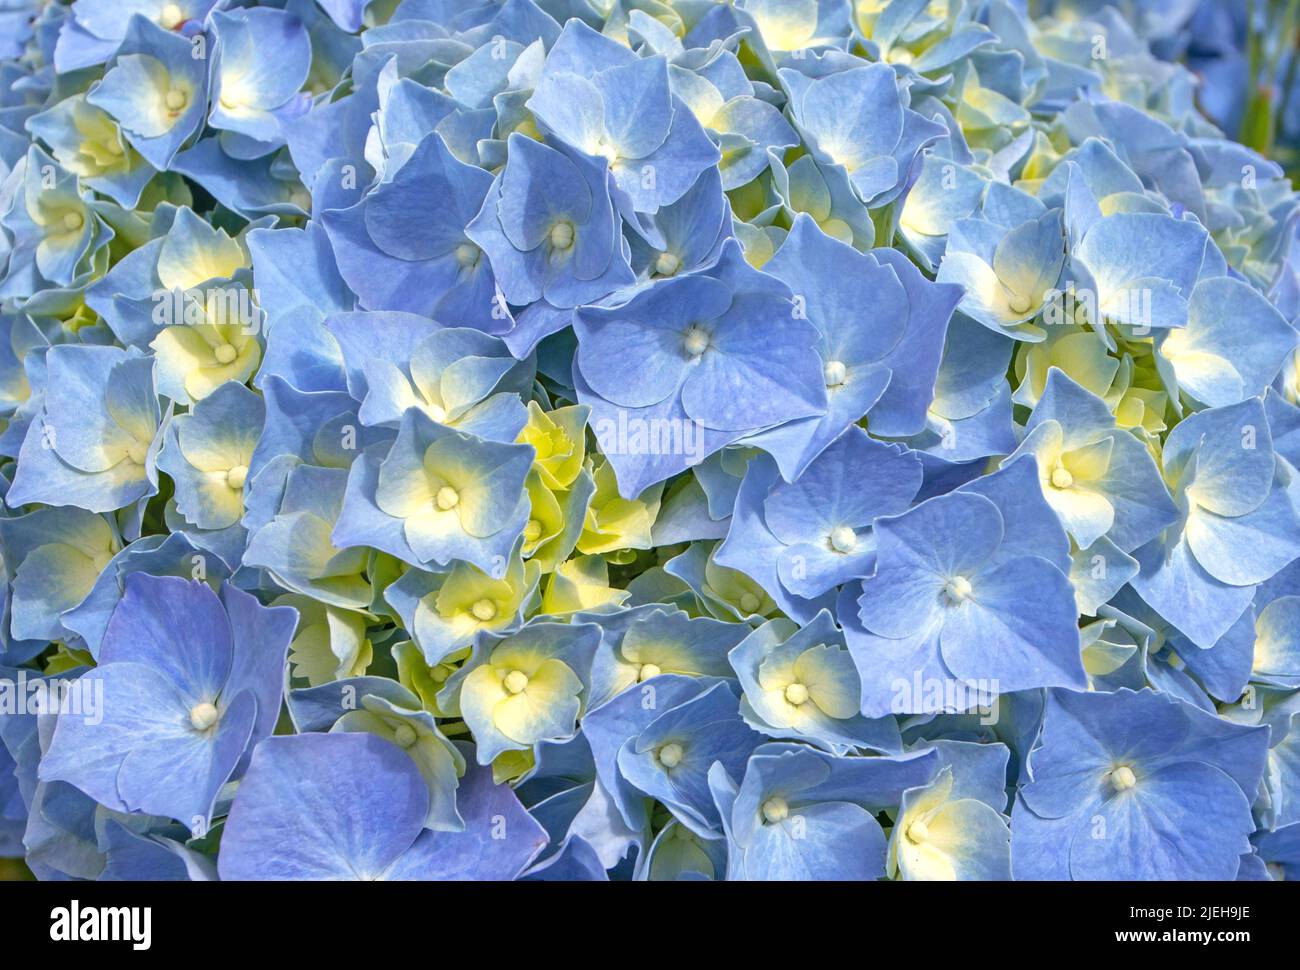 Blue hydrangea macrophylla flowers and yellow buds closeup background. Spectacular hortensia flowering plant. Stock Photo